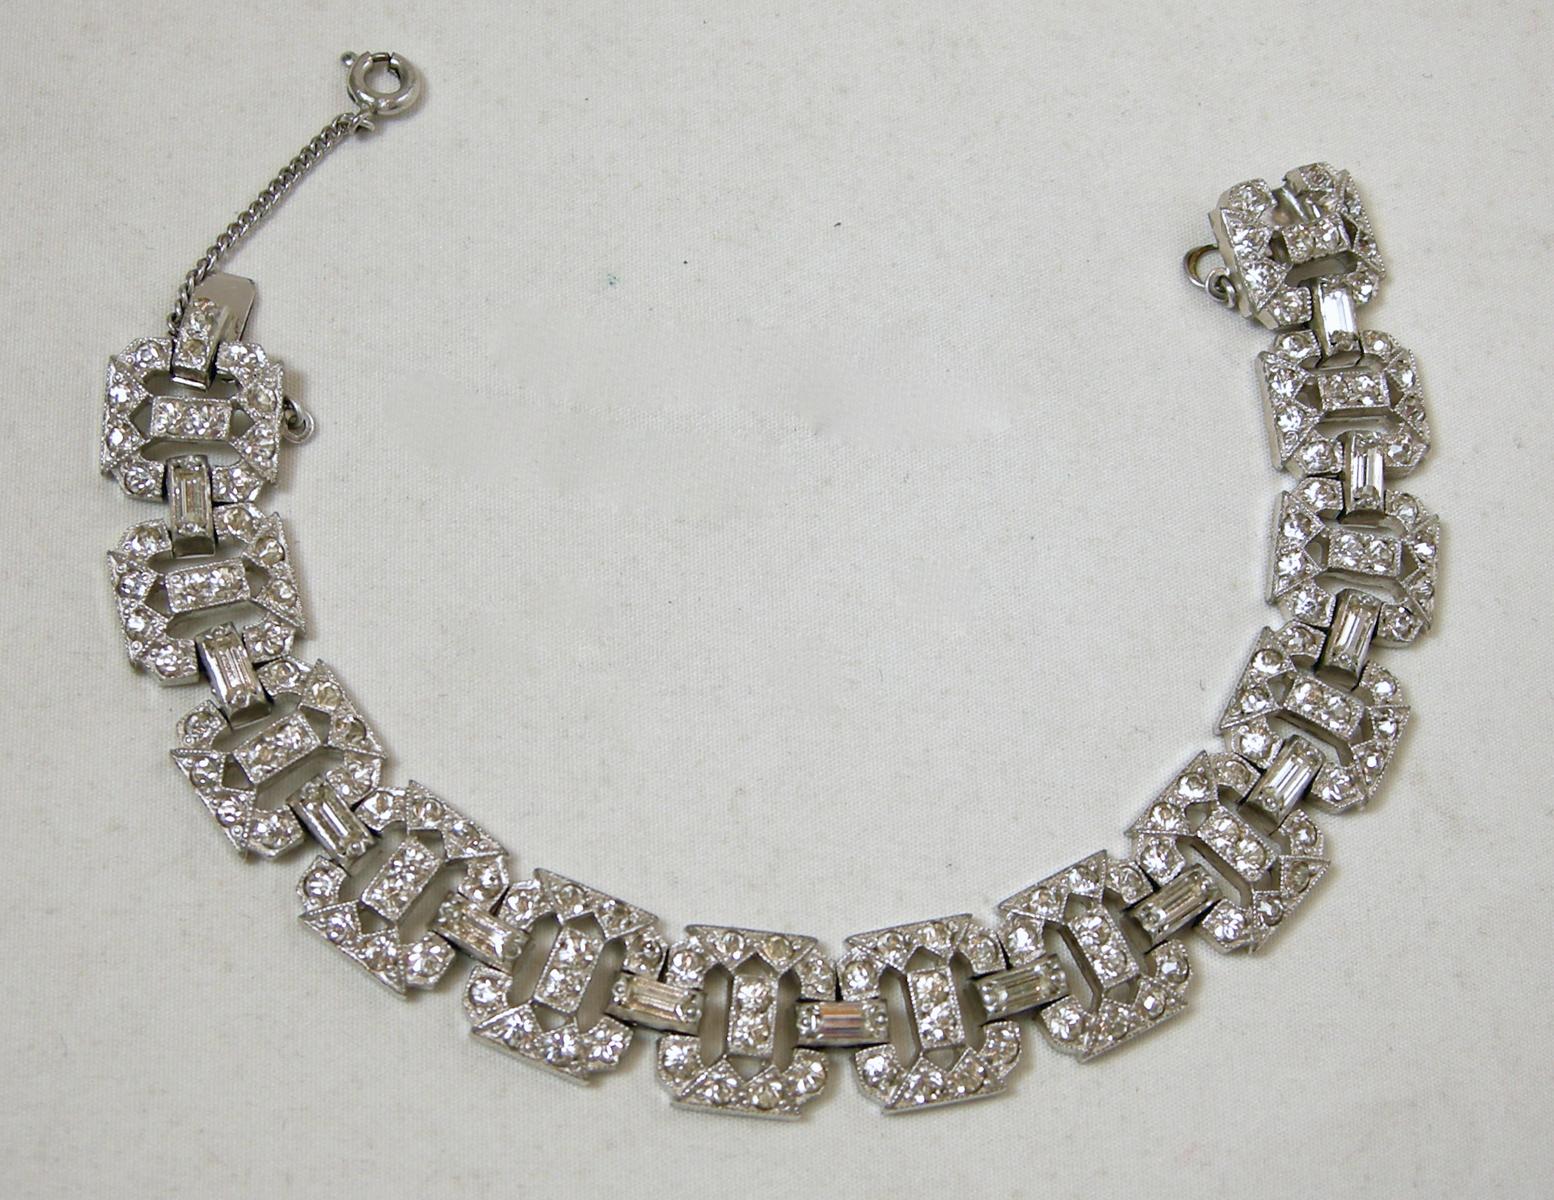 This vintage Art Deco 1930s bracelet has an open crystal link design in a rhodium silver tone setting.   In excellent condition, this bracelet measures 7-1/2” x 1/2” with a slide in clasp and safety chain.